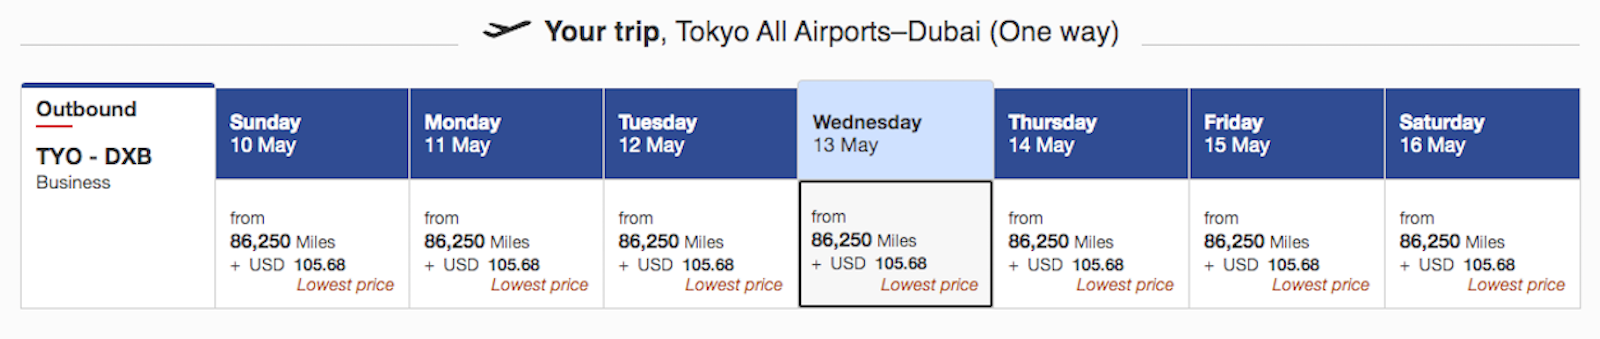 Award surcharges are lowest from Japan